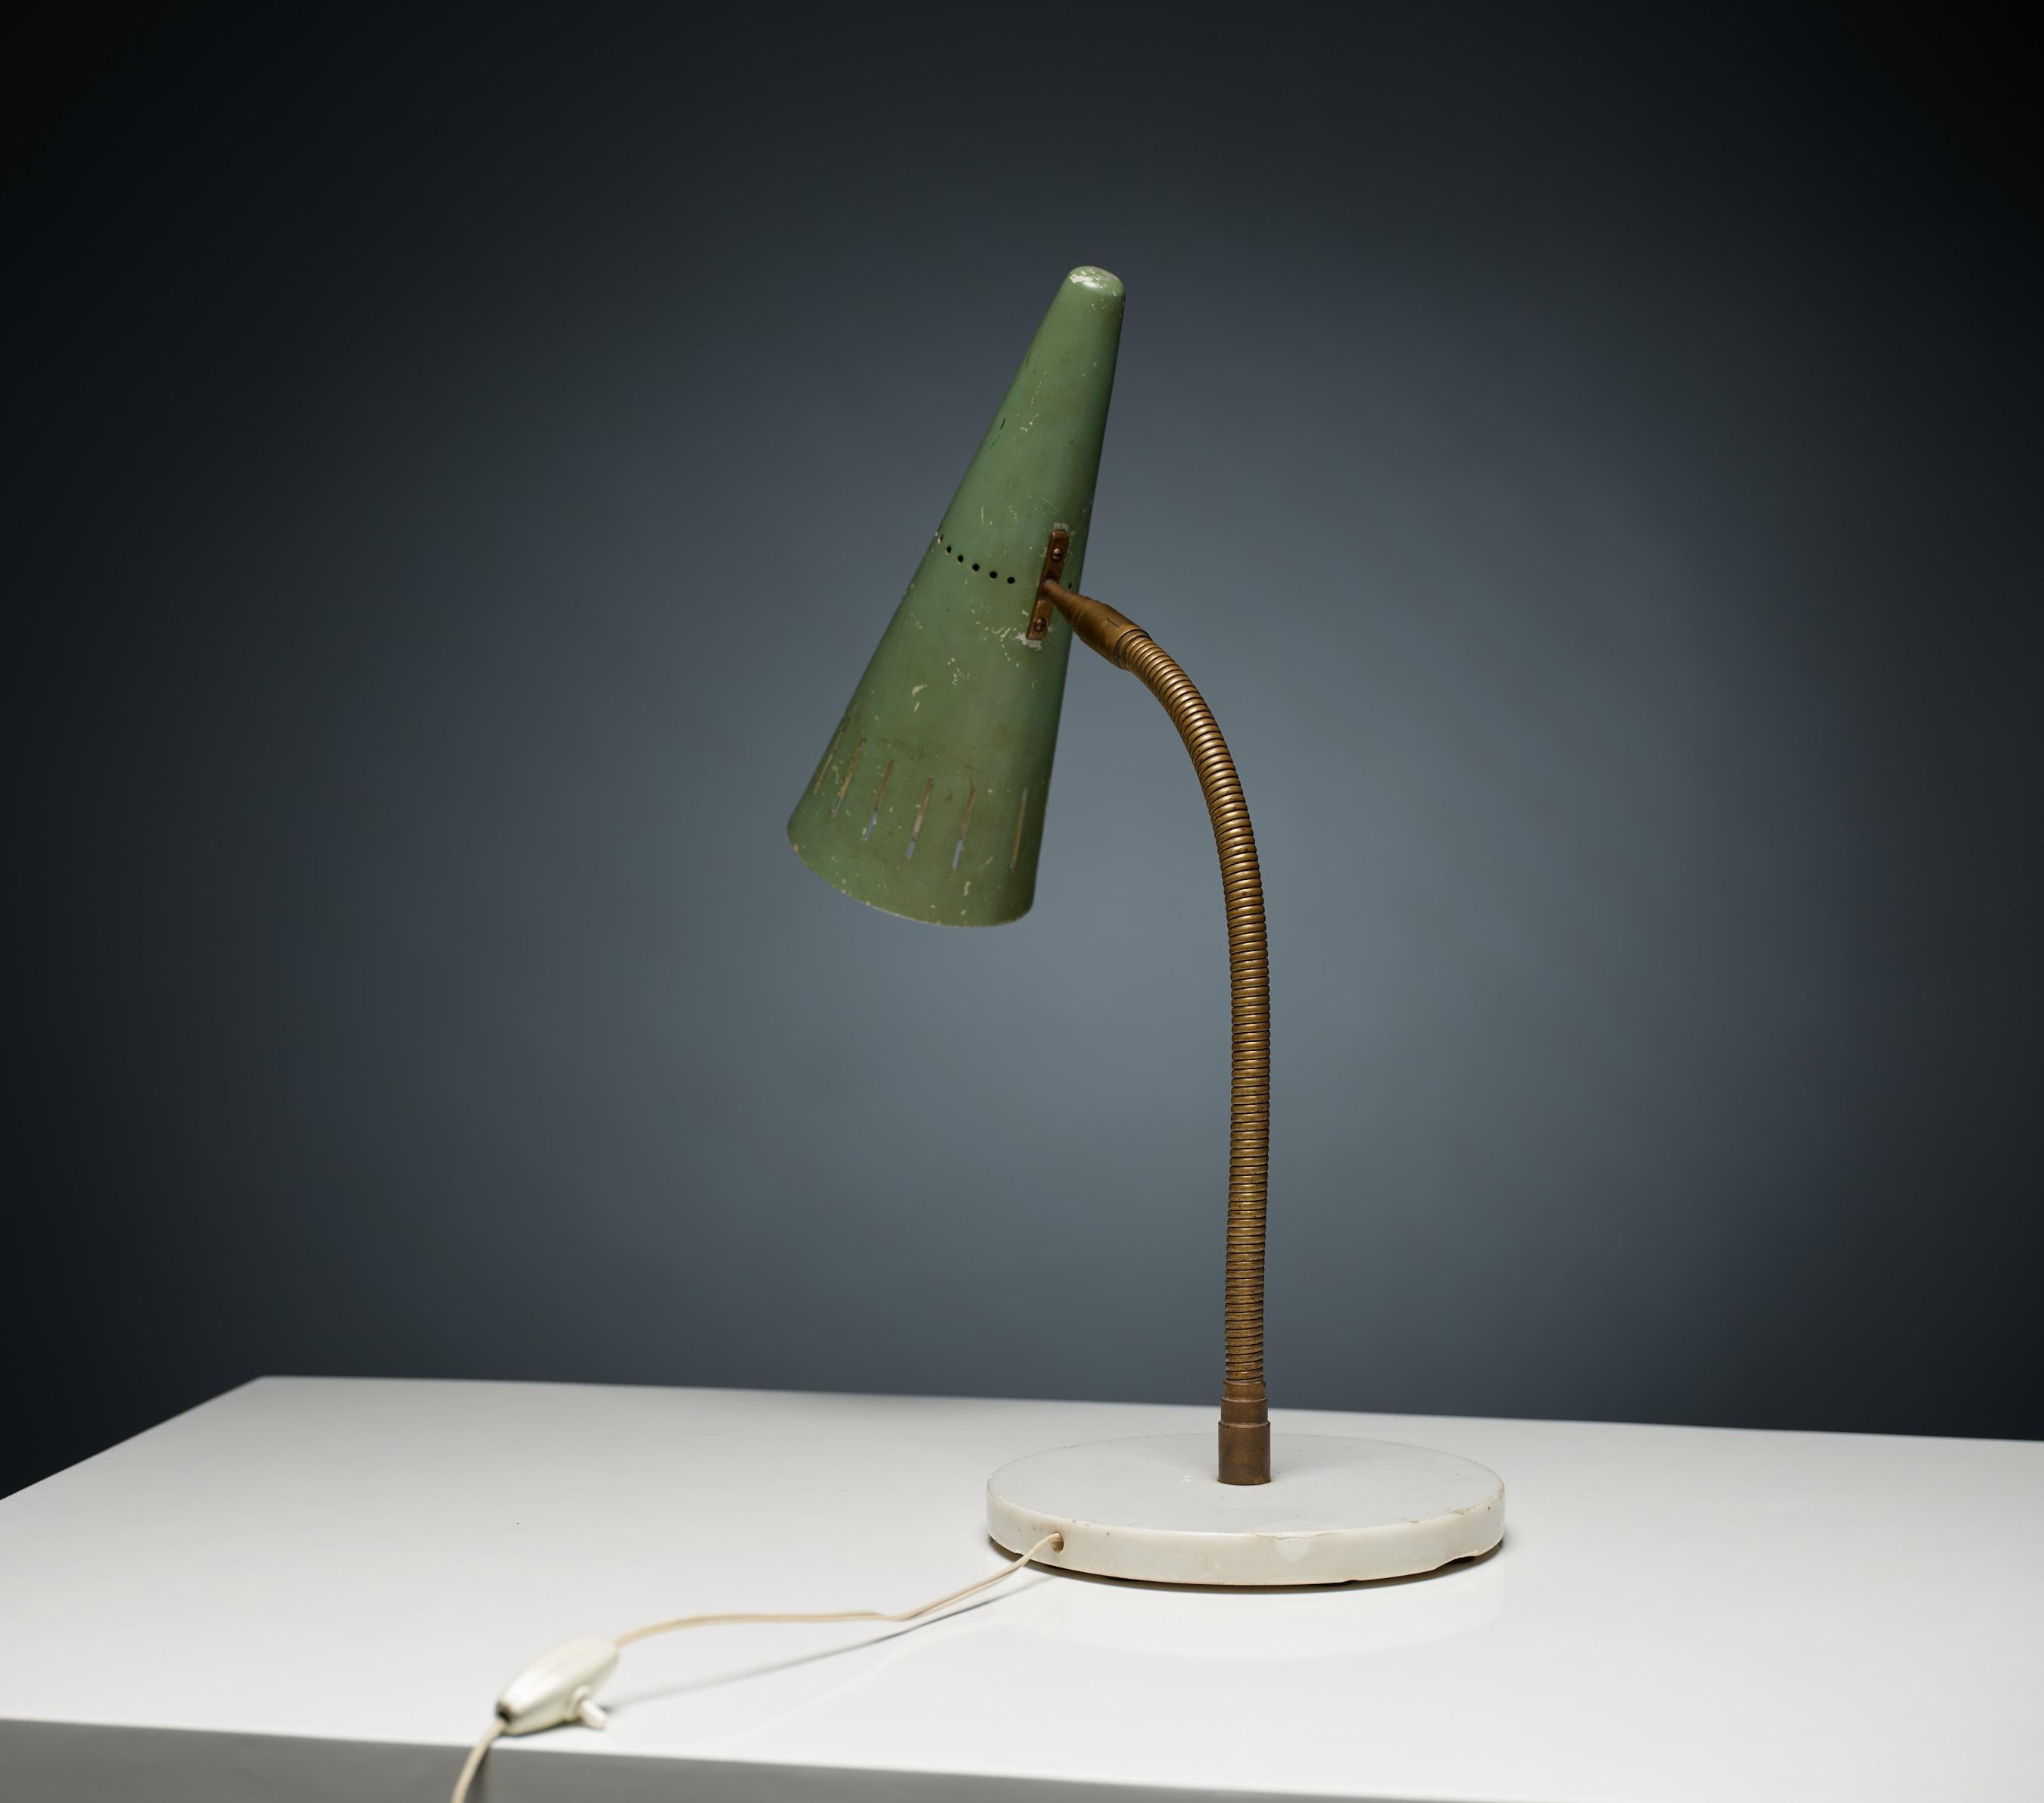 Vintage Italian Table Lamp - 1950s Design with Green Lacquered Metal Shade 2